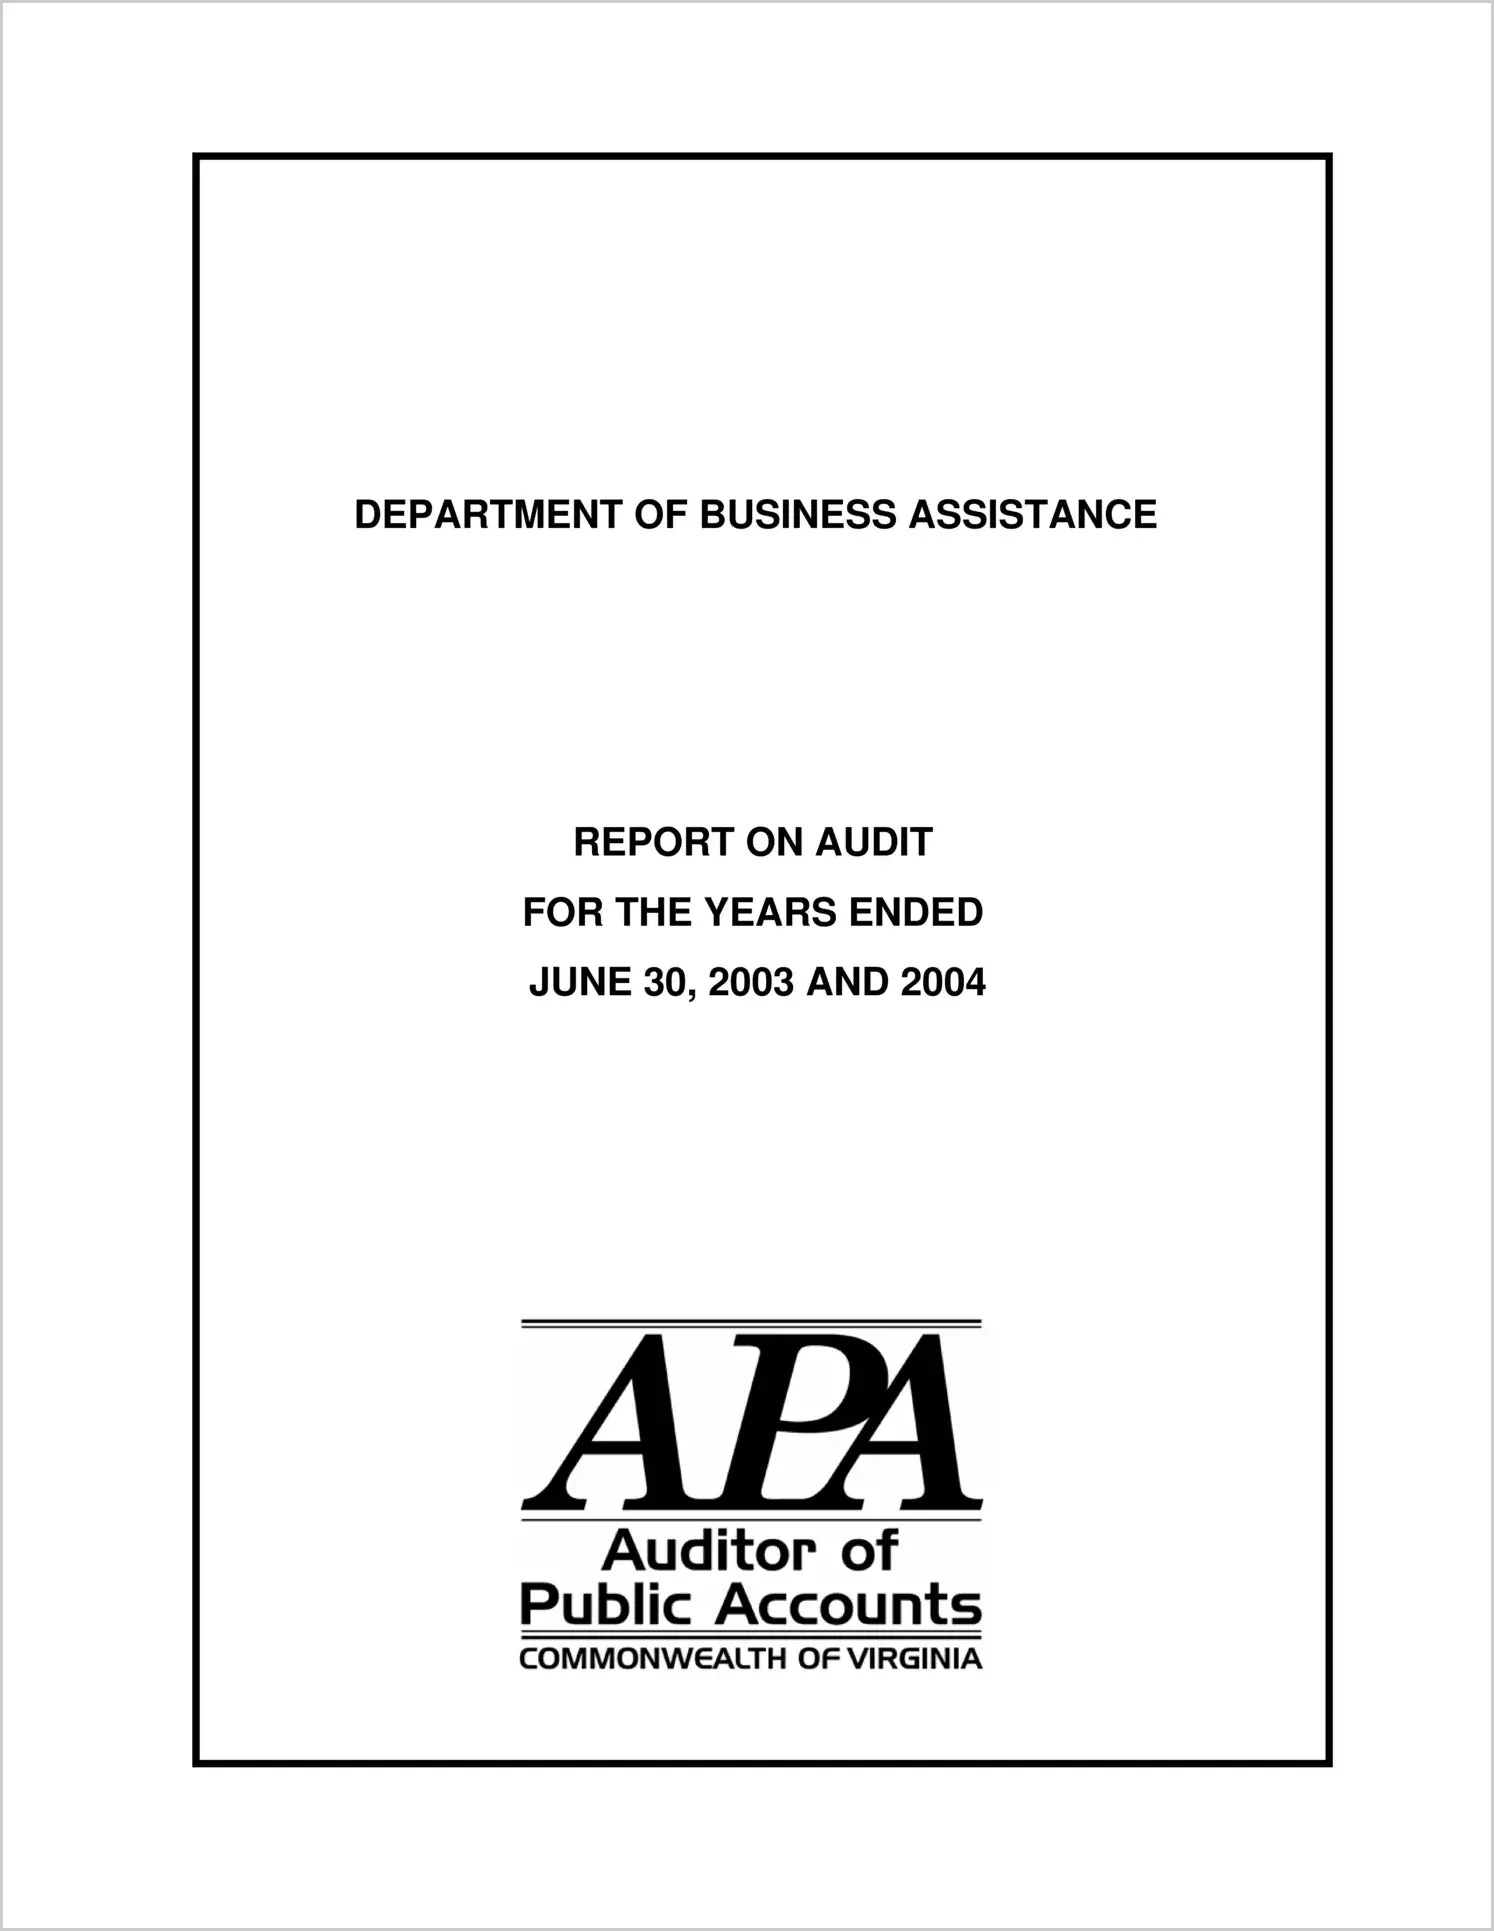 Department of Business Assistance for the years ended June 30, 2003 and 2004